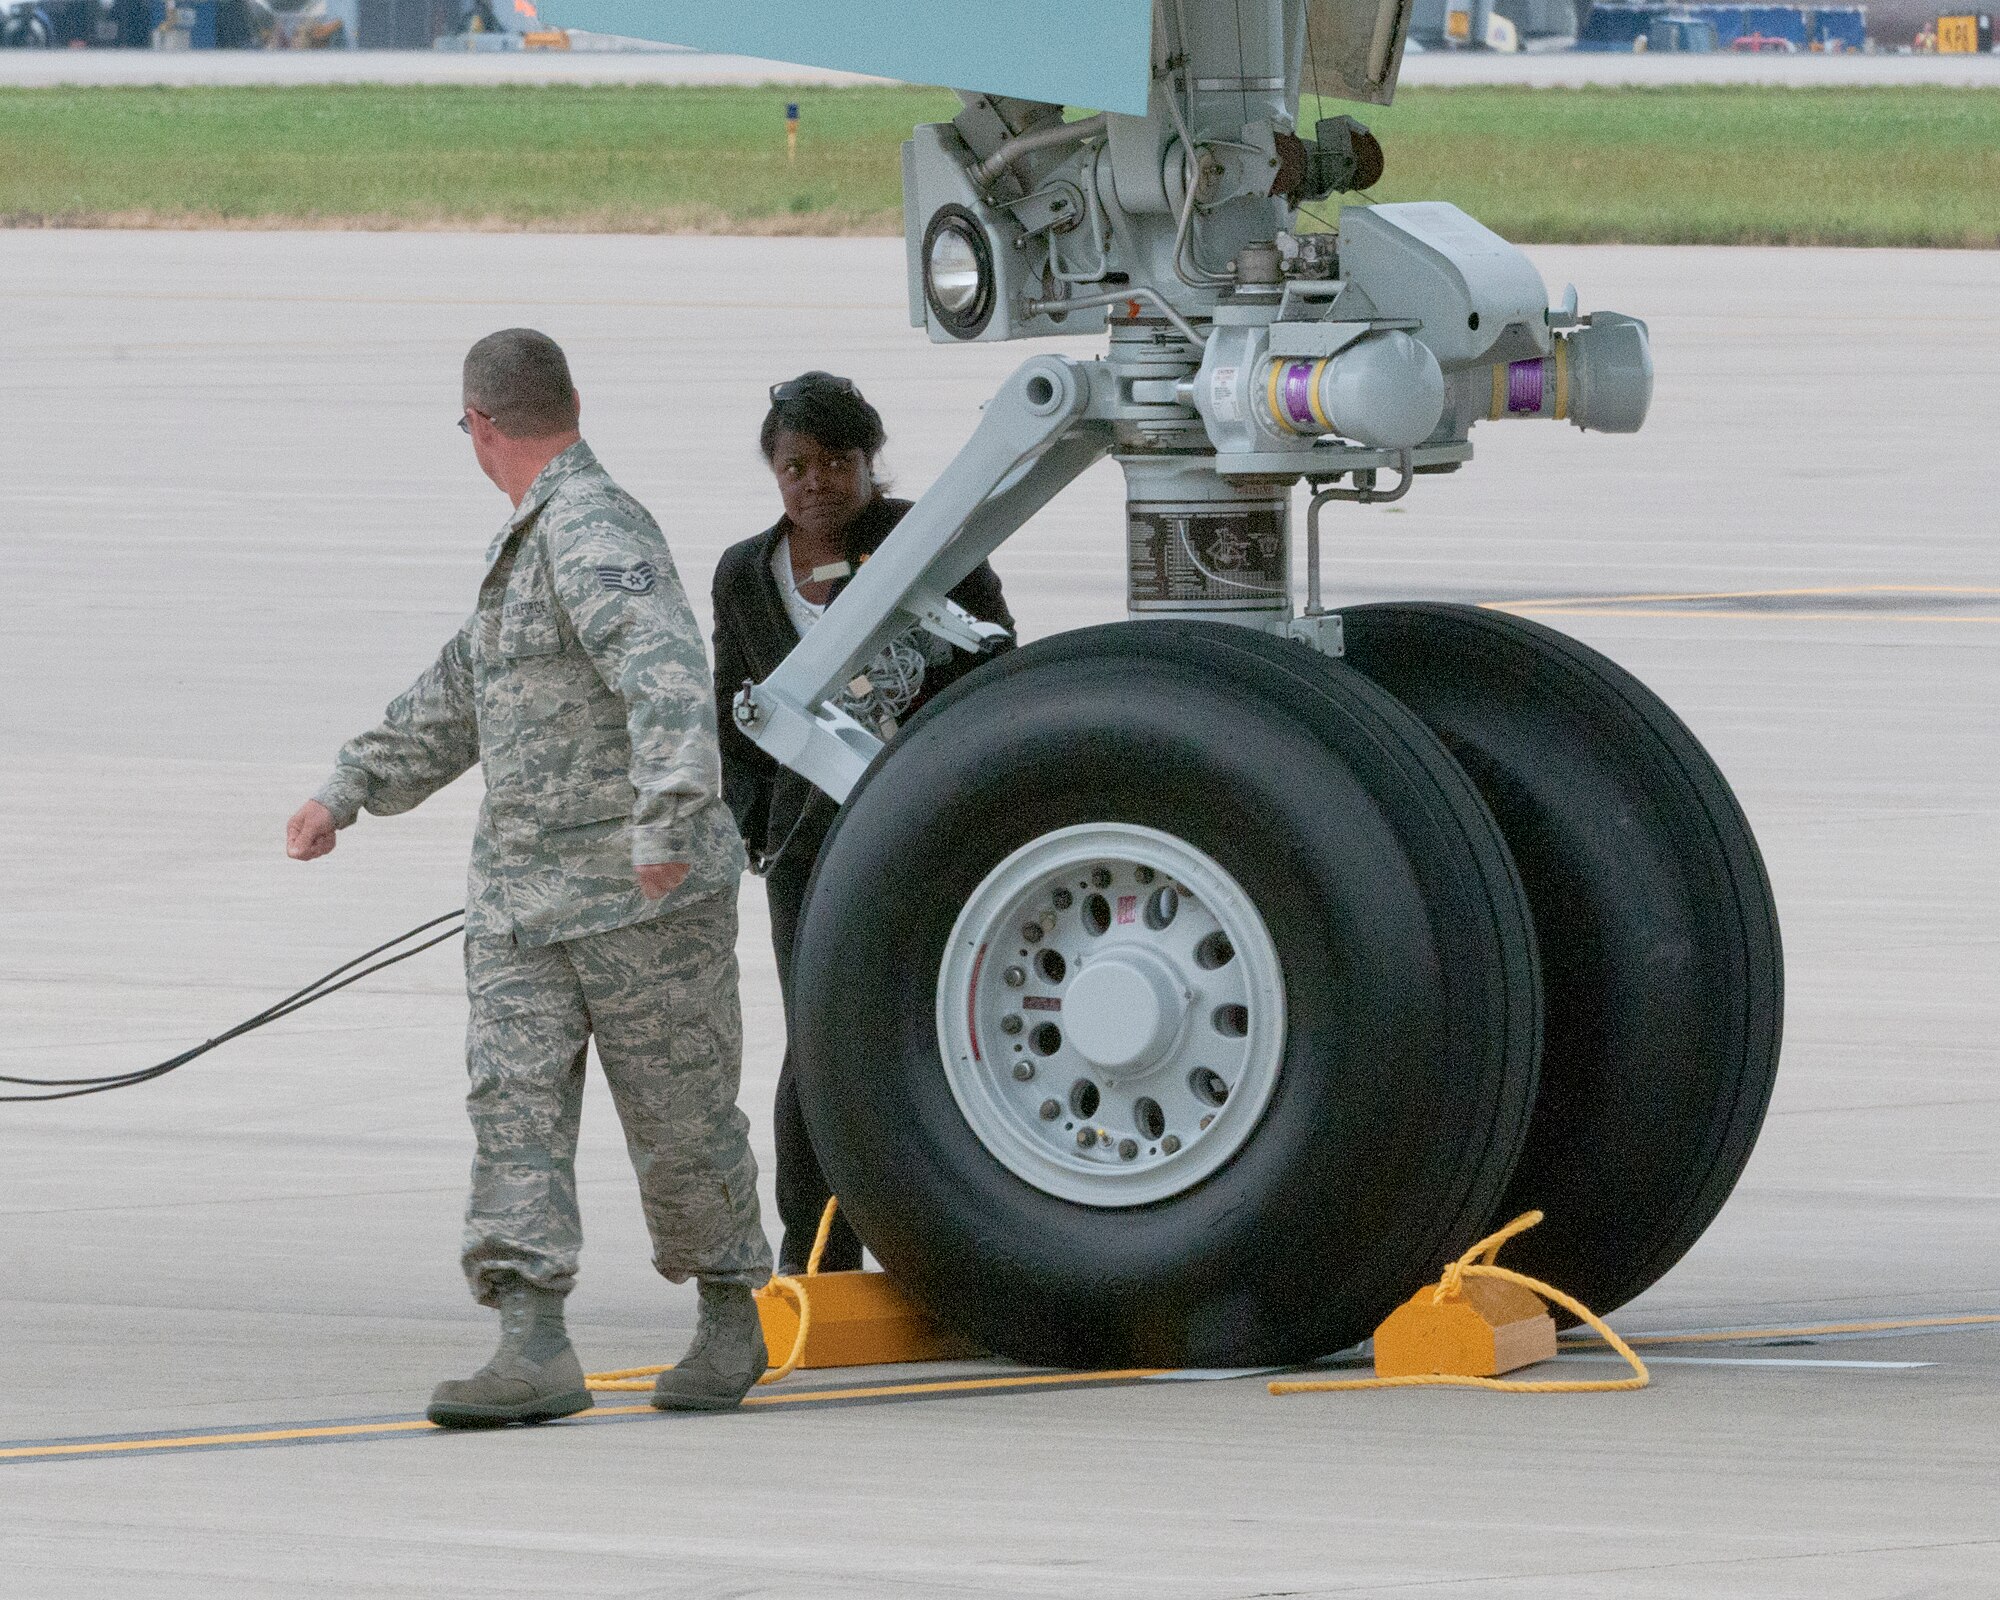 Staff Sgt. Patrick Koss of the 133rd Aircraft Maintenance Squadron checks the chocks he just placed under the wheel of Air Force One on the ramp of the 133rd Airlift Wing at the Minneapolis-St. Paul International Airport on August 30, 2011. The VC-25A, which is a highly customized Boeing 747-200B, arrived at the Minnesota Air National Guard base bringing President Barack Obama, the commander-in-chief, to the Twin Cities where he delivered a speech to the American Legion Annual Conference. The visit is heavily supported with security, logistics, media and other support by the Airmen of the 133rd Airlift Wing. USAF official photo by Senior Master Sgt. Mark Moss